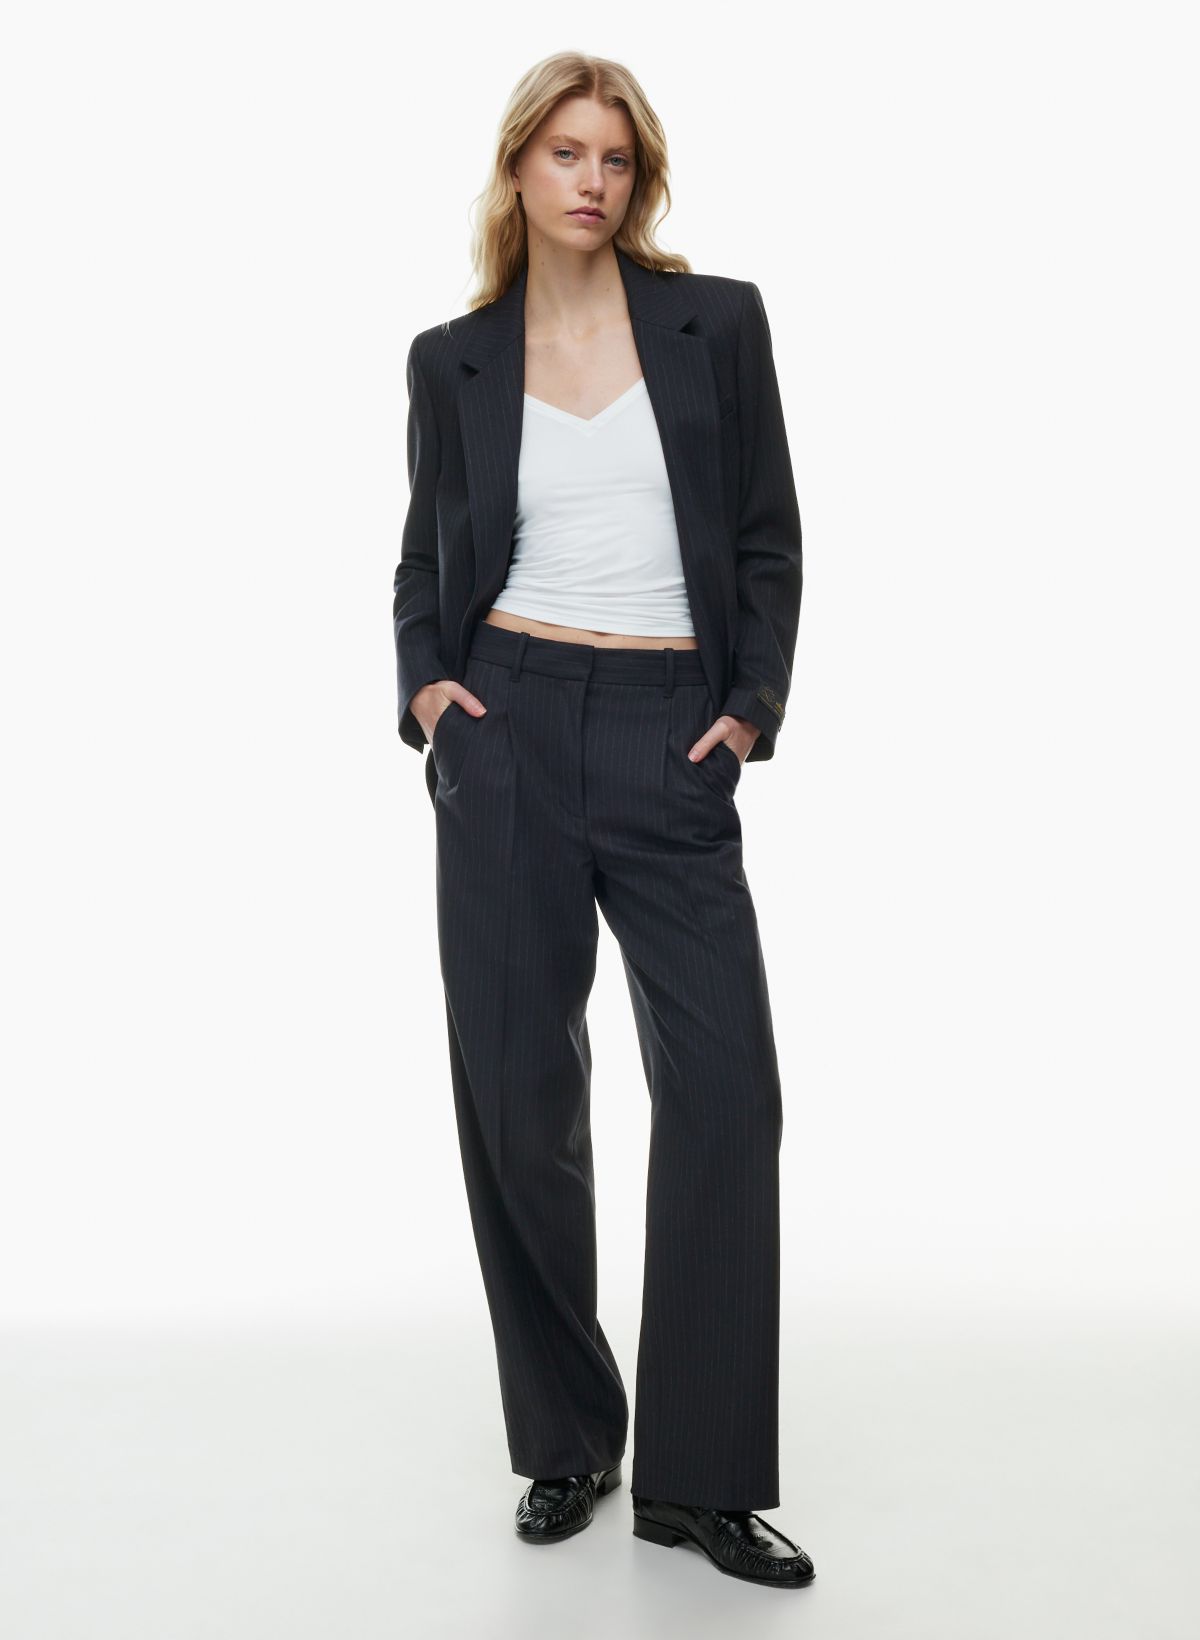 Aritzia Effortless pant move over. For the petite girl try LOFT's Peyt, trousers